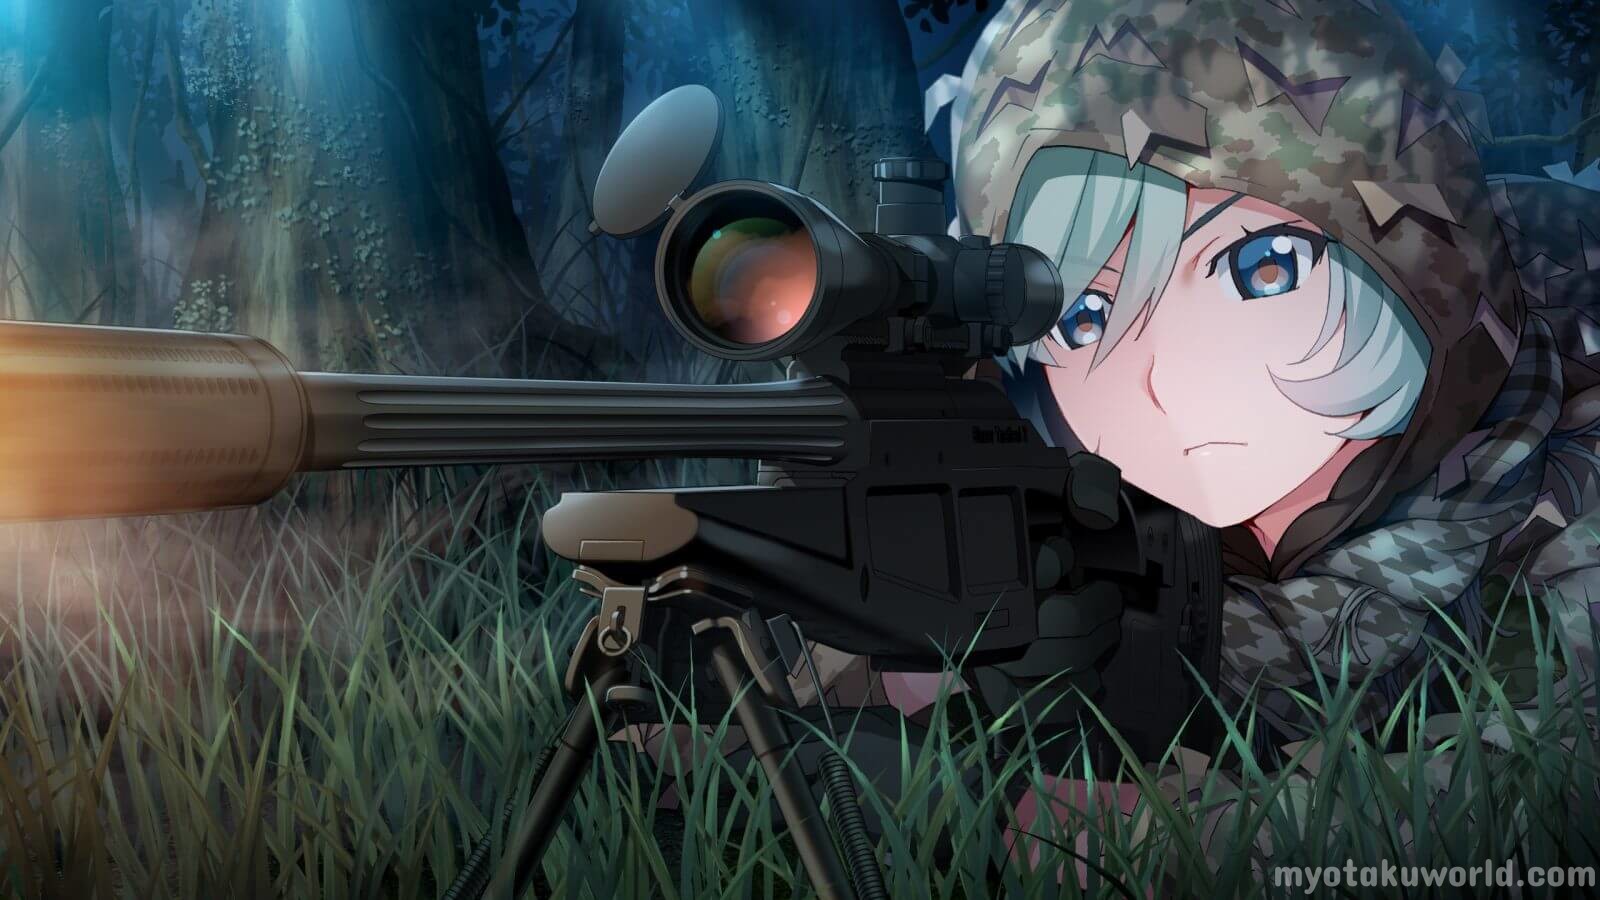 15 Greatest Anime Snipers of All Time - My Otaku World